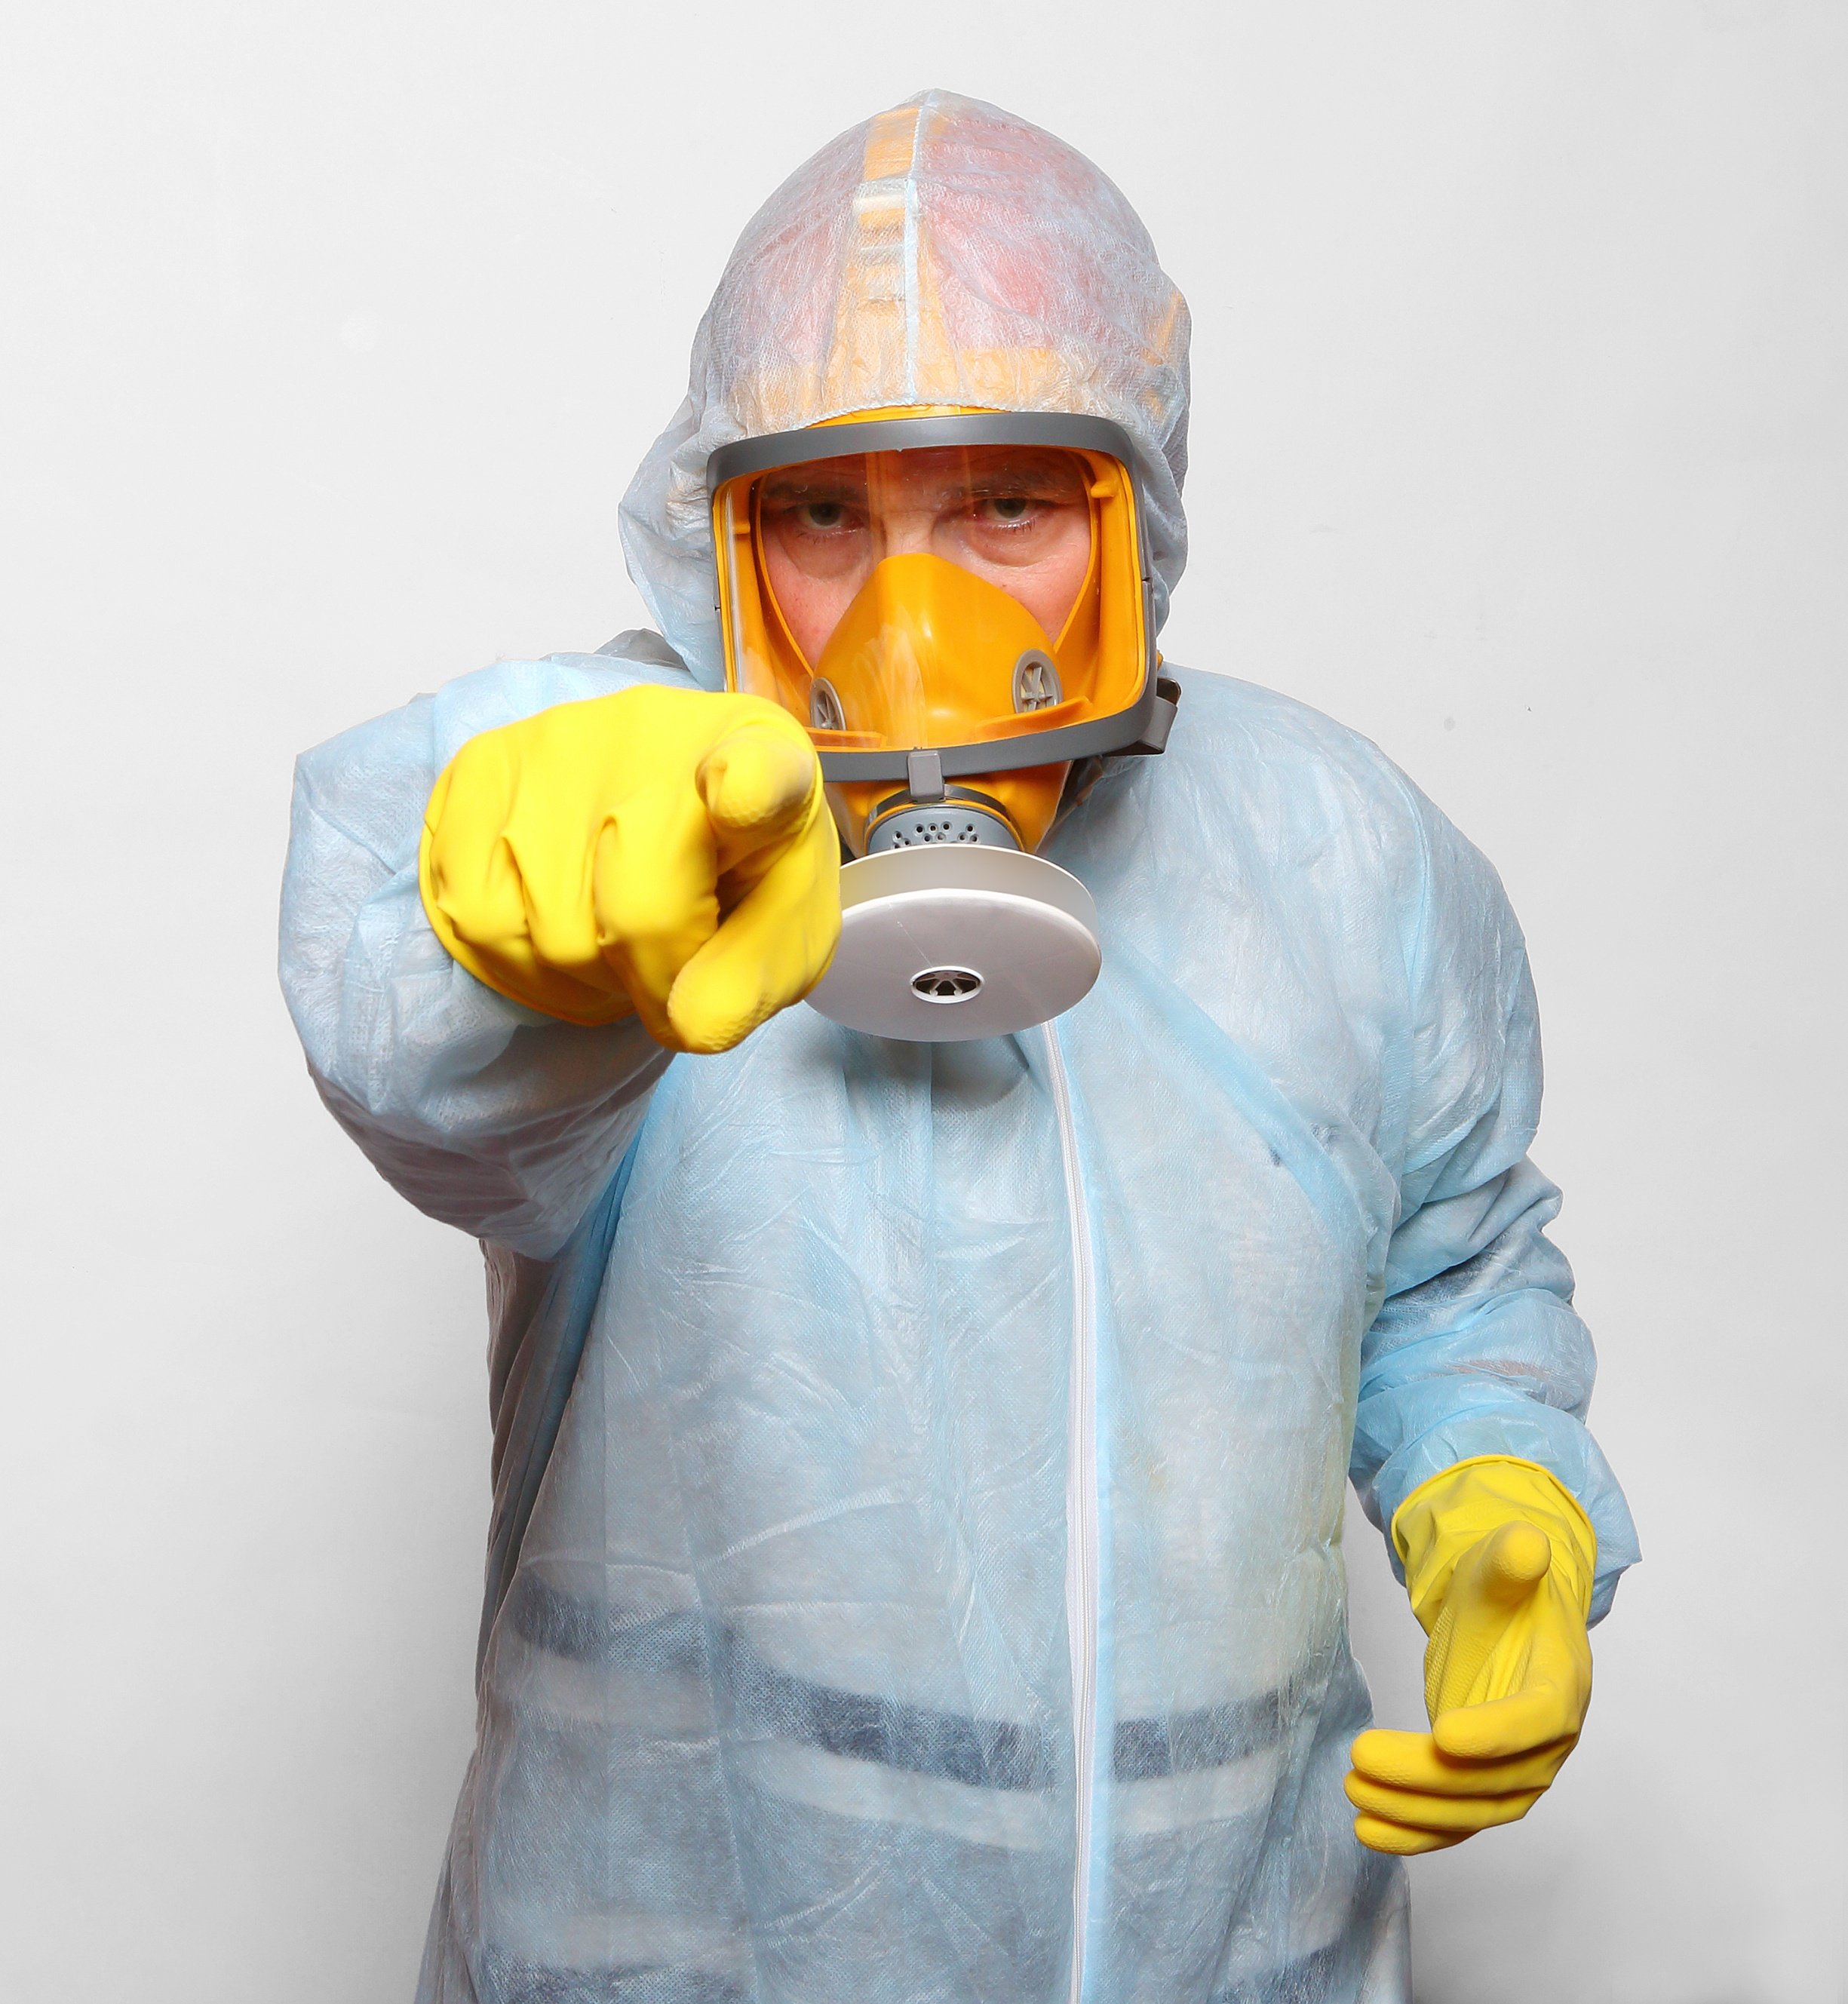 bigstock-Man-in-protective-clothing-wit-74236057.jpg